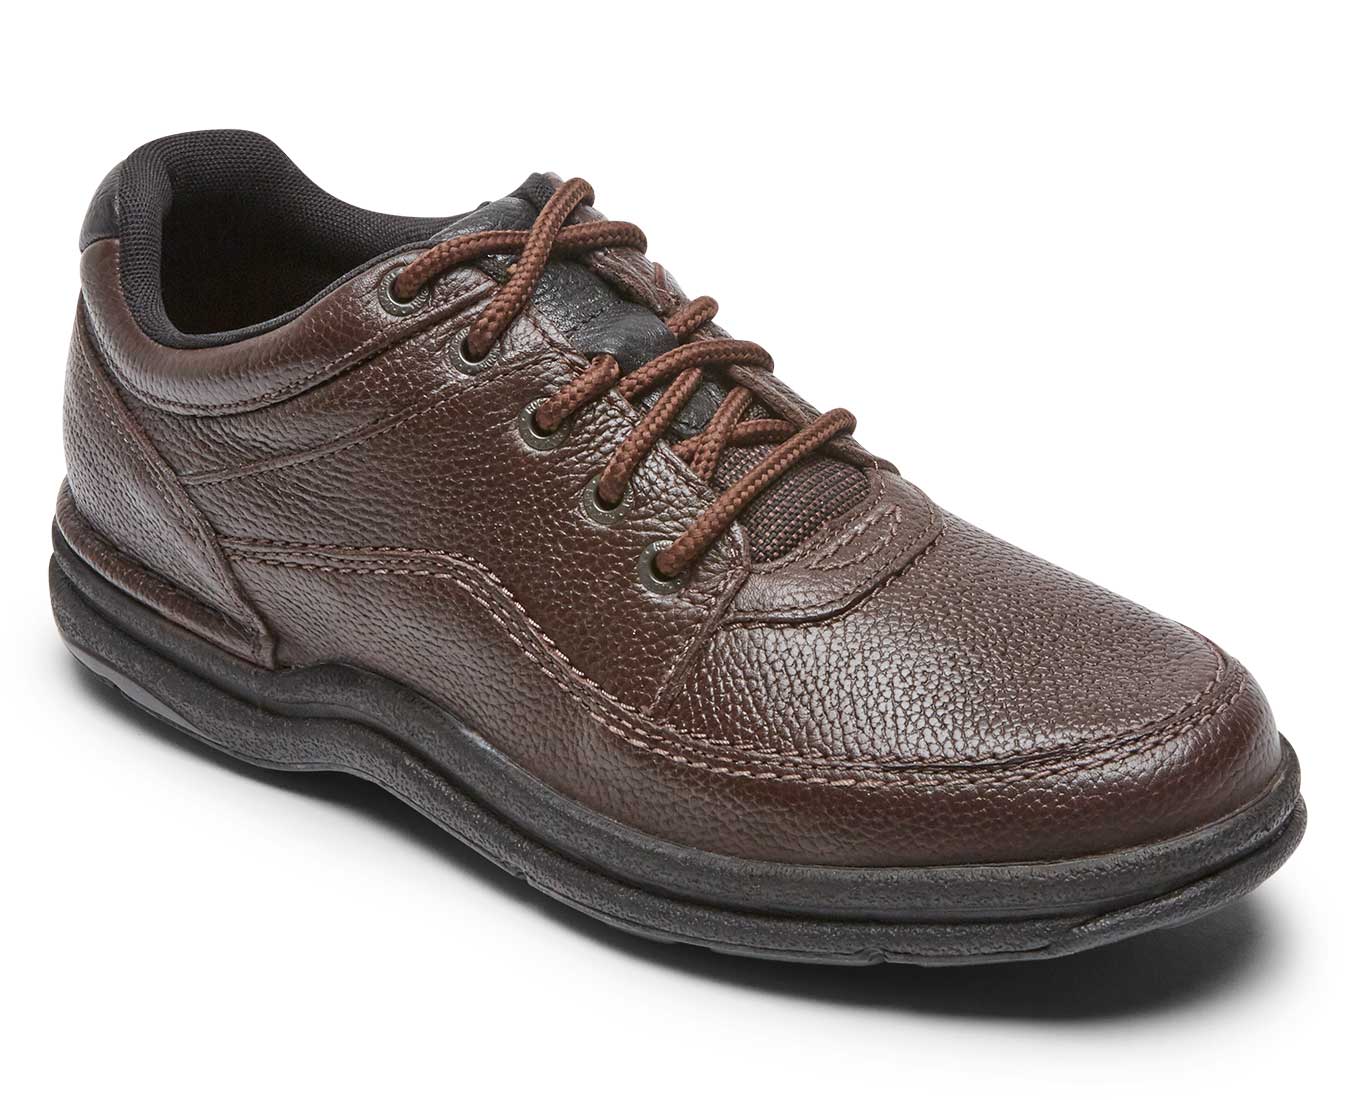 Do Rockport Shoes Run True To Size